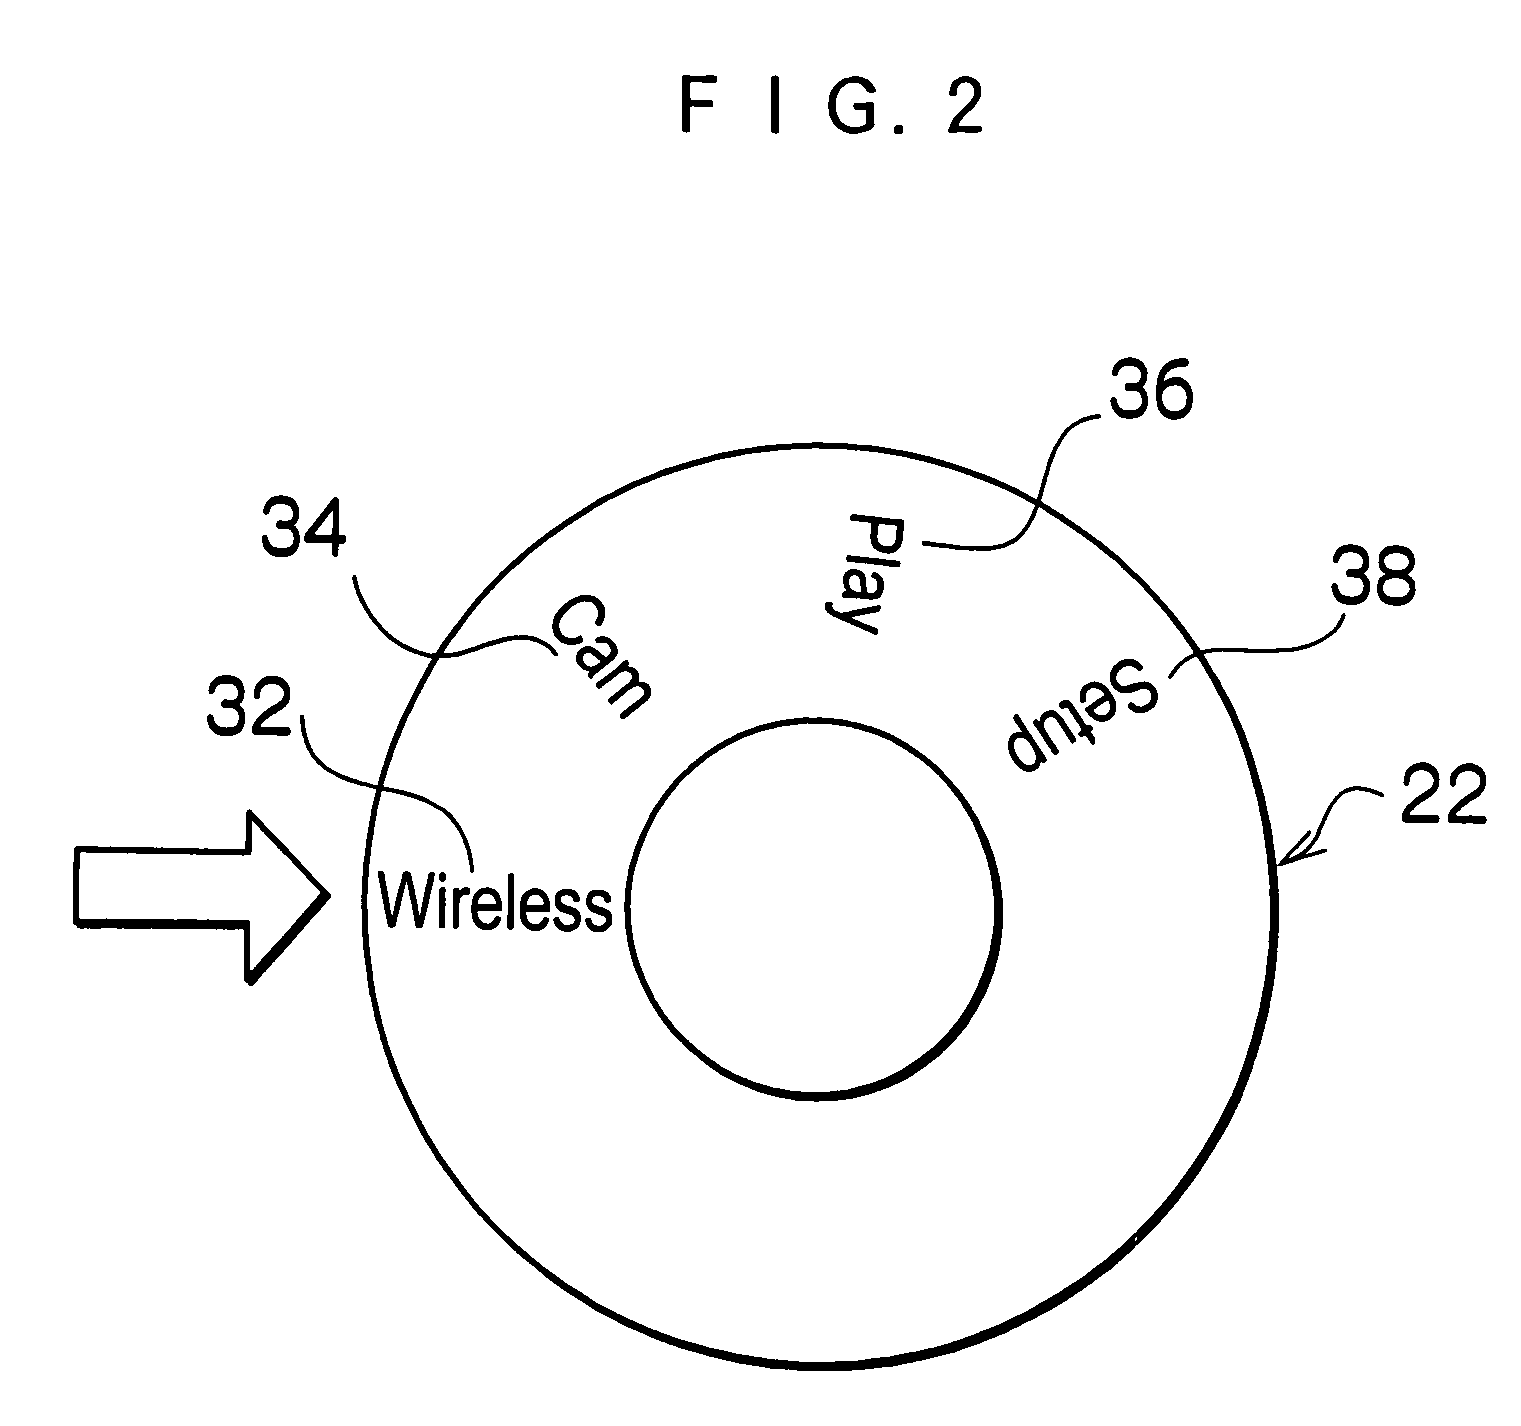 Image pick-up information transmitting system and remote control method for an information transmitting system